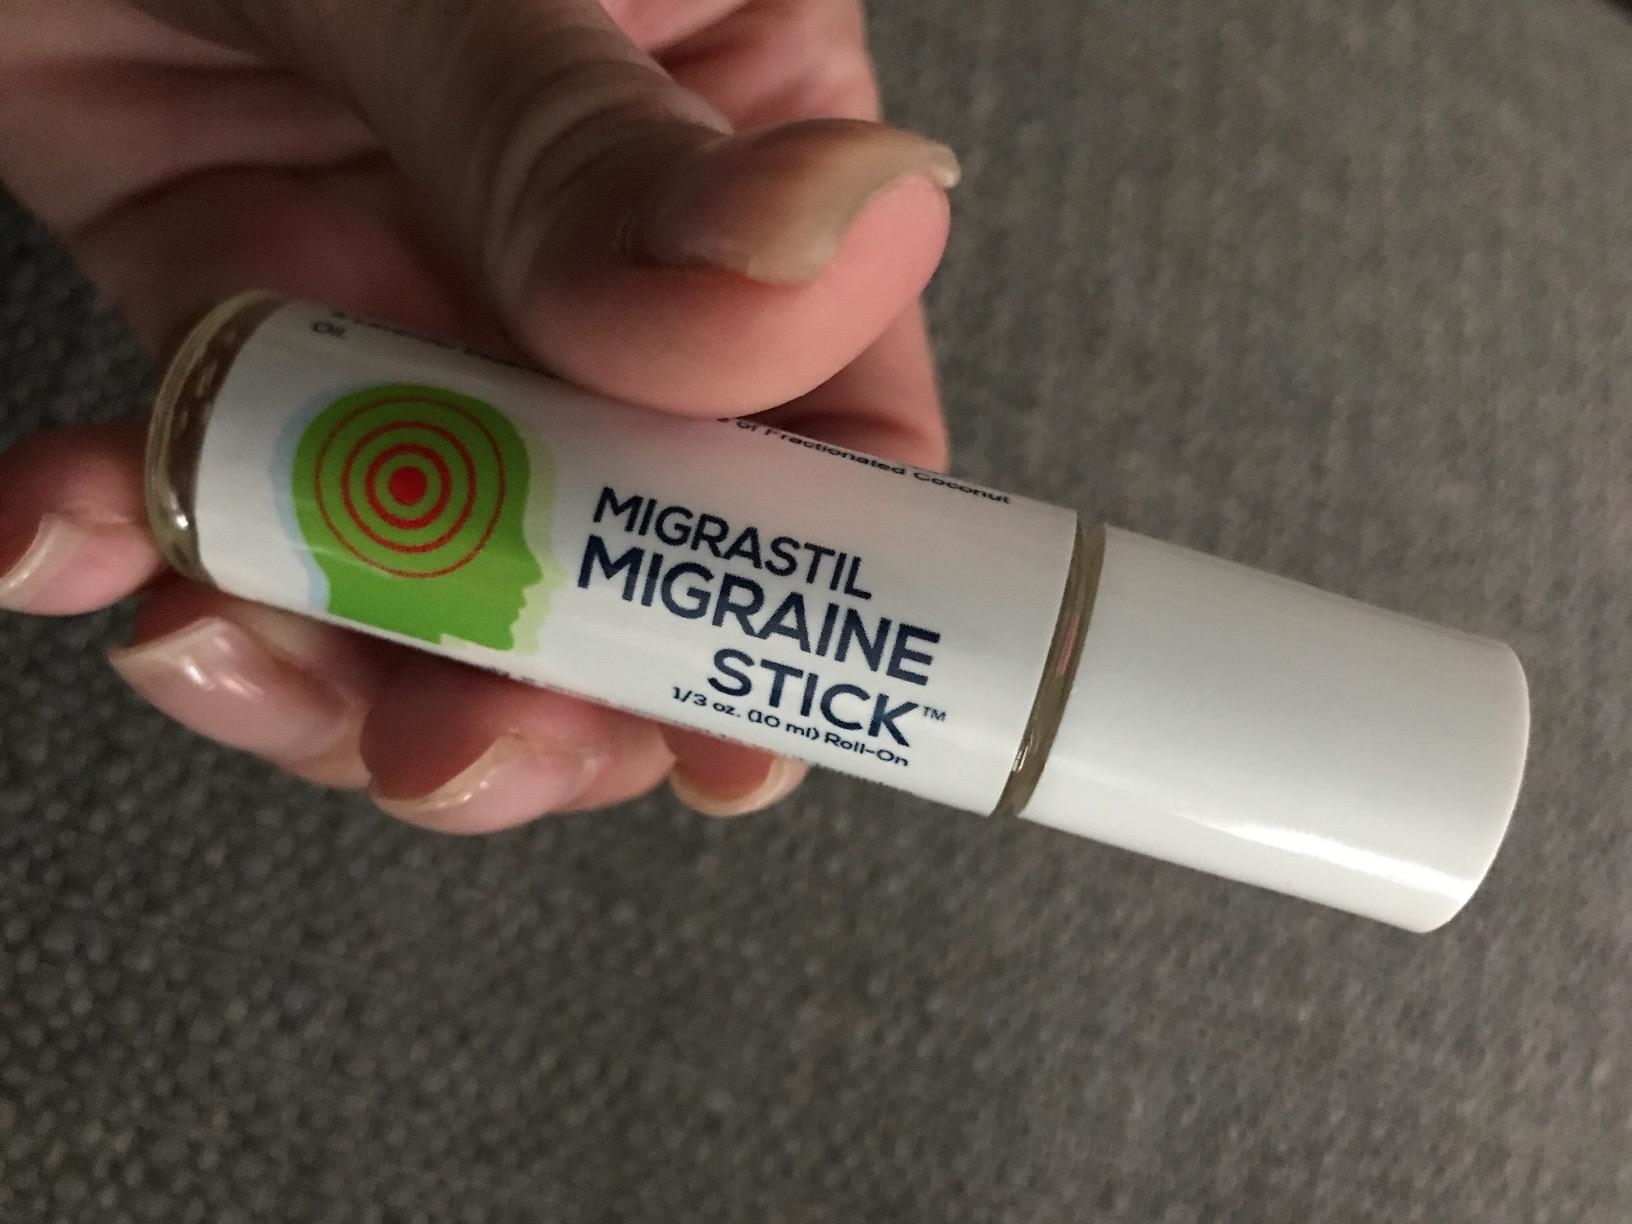 Reviewer&#x27;s photo of their hand holding the migraine stick